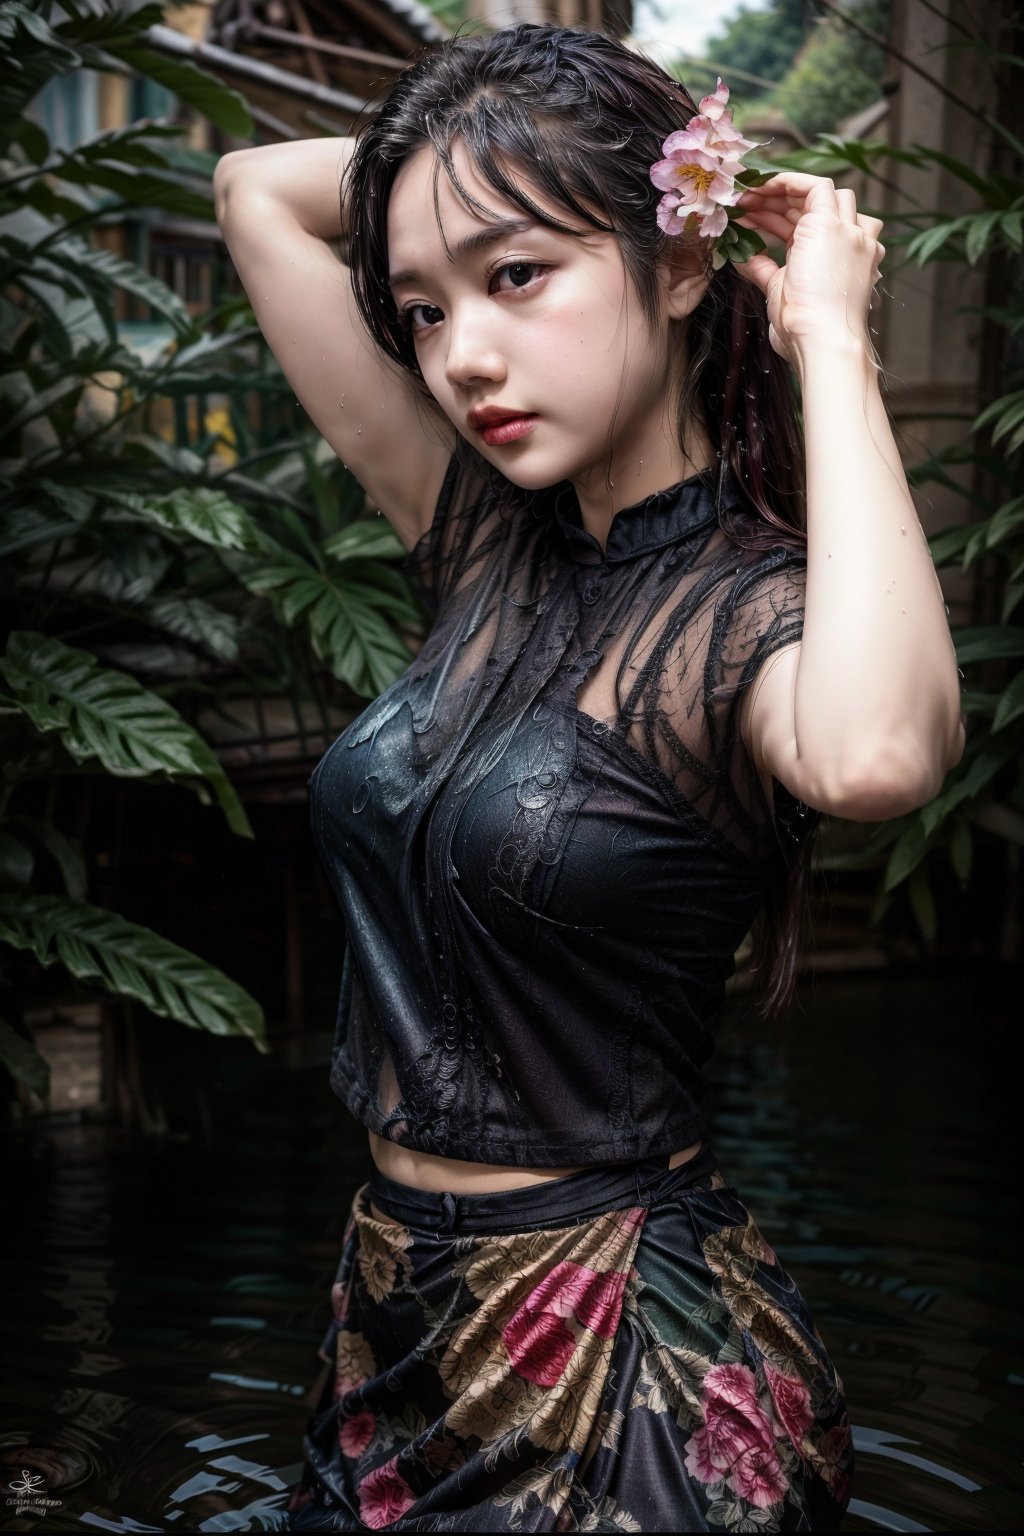 masterpiece, high quality:1.5), (8K, HDR), masterpiece, best quality, 1girl, solo, PrettyLadyxmcc,OrgLadymm,long_ponytail,
1girl, solo, long hair, skirt, shirt, black hair, jewelry, flower, outdoors, blurry, realistic,((sexy pose)),wet_clothing,garden,flowers,arms_raised,view_from_side